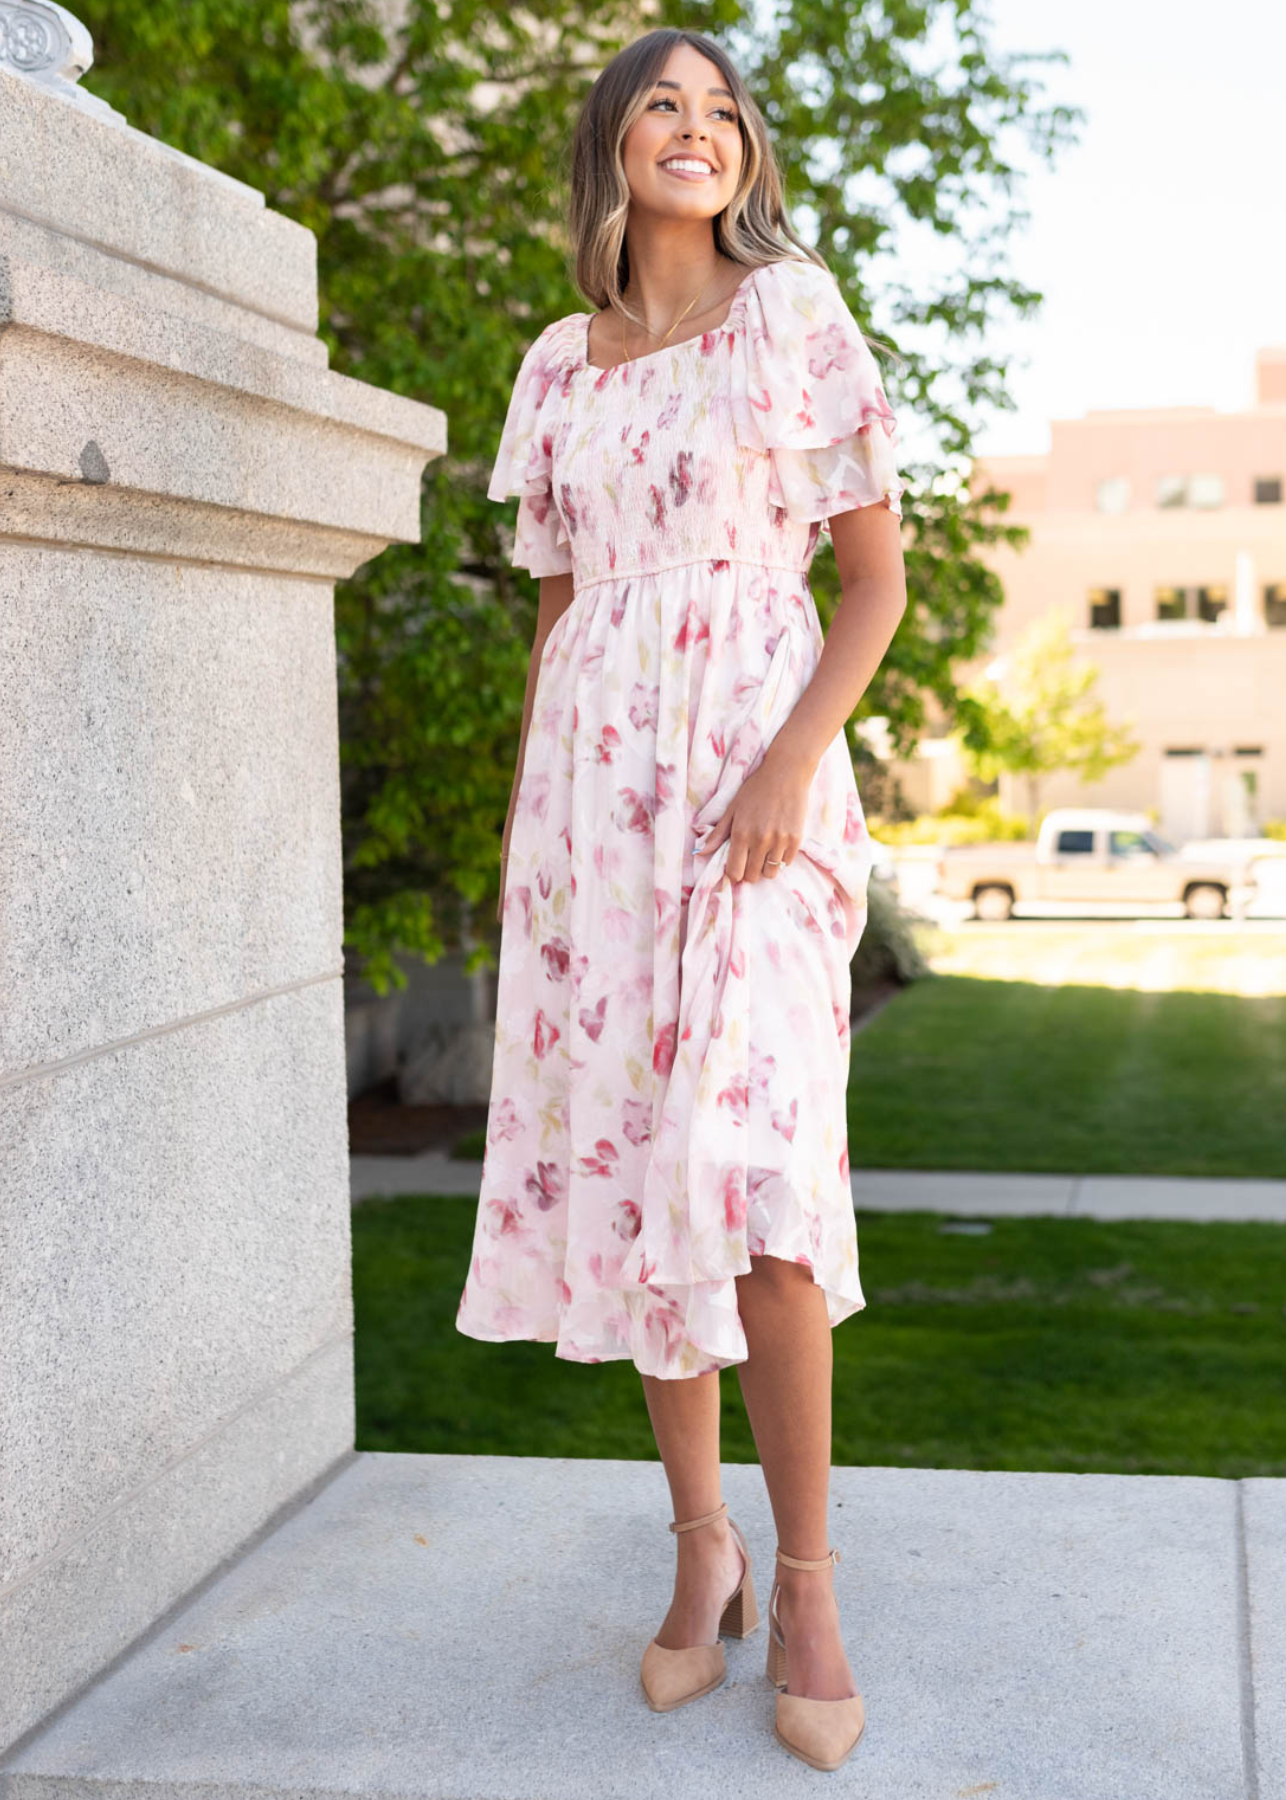 Blush watercolor floral dress with short sleeves